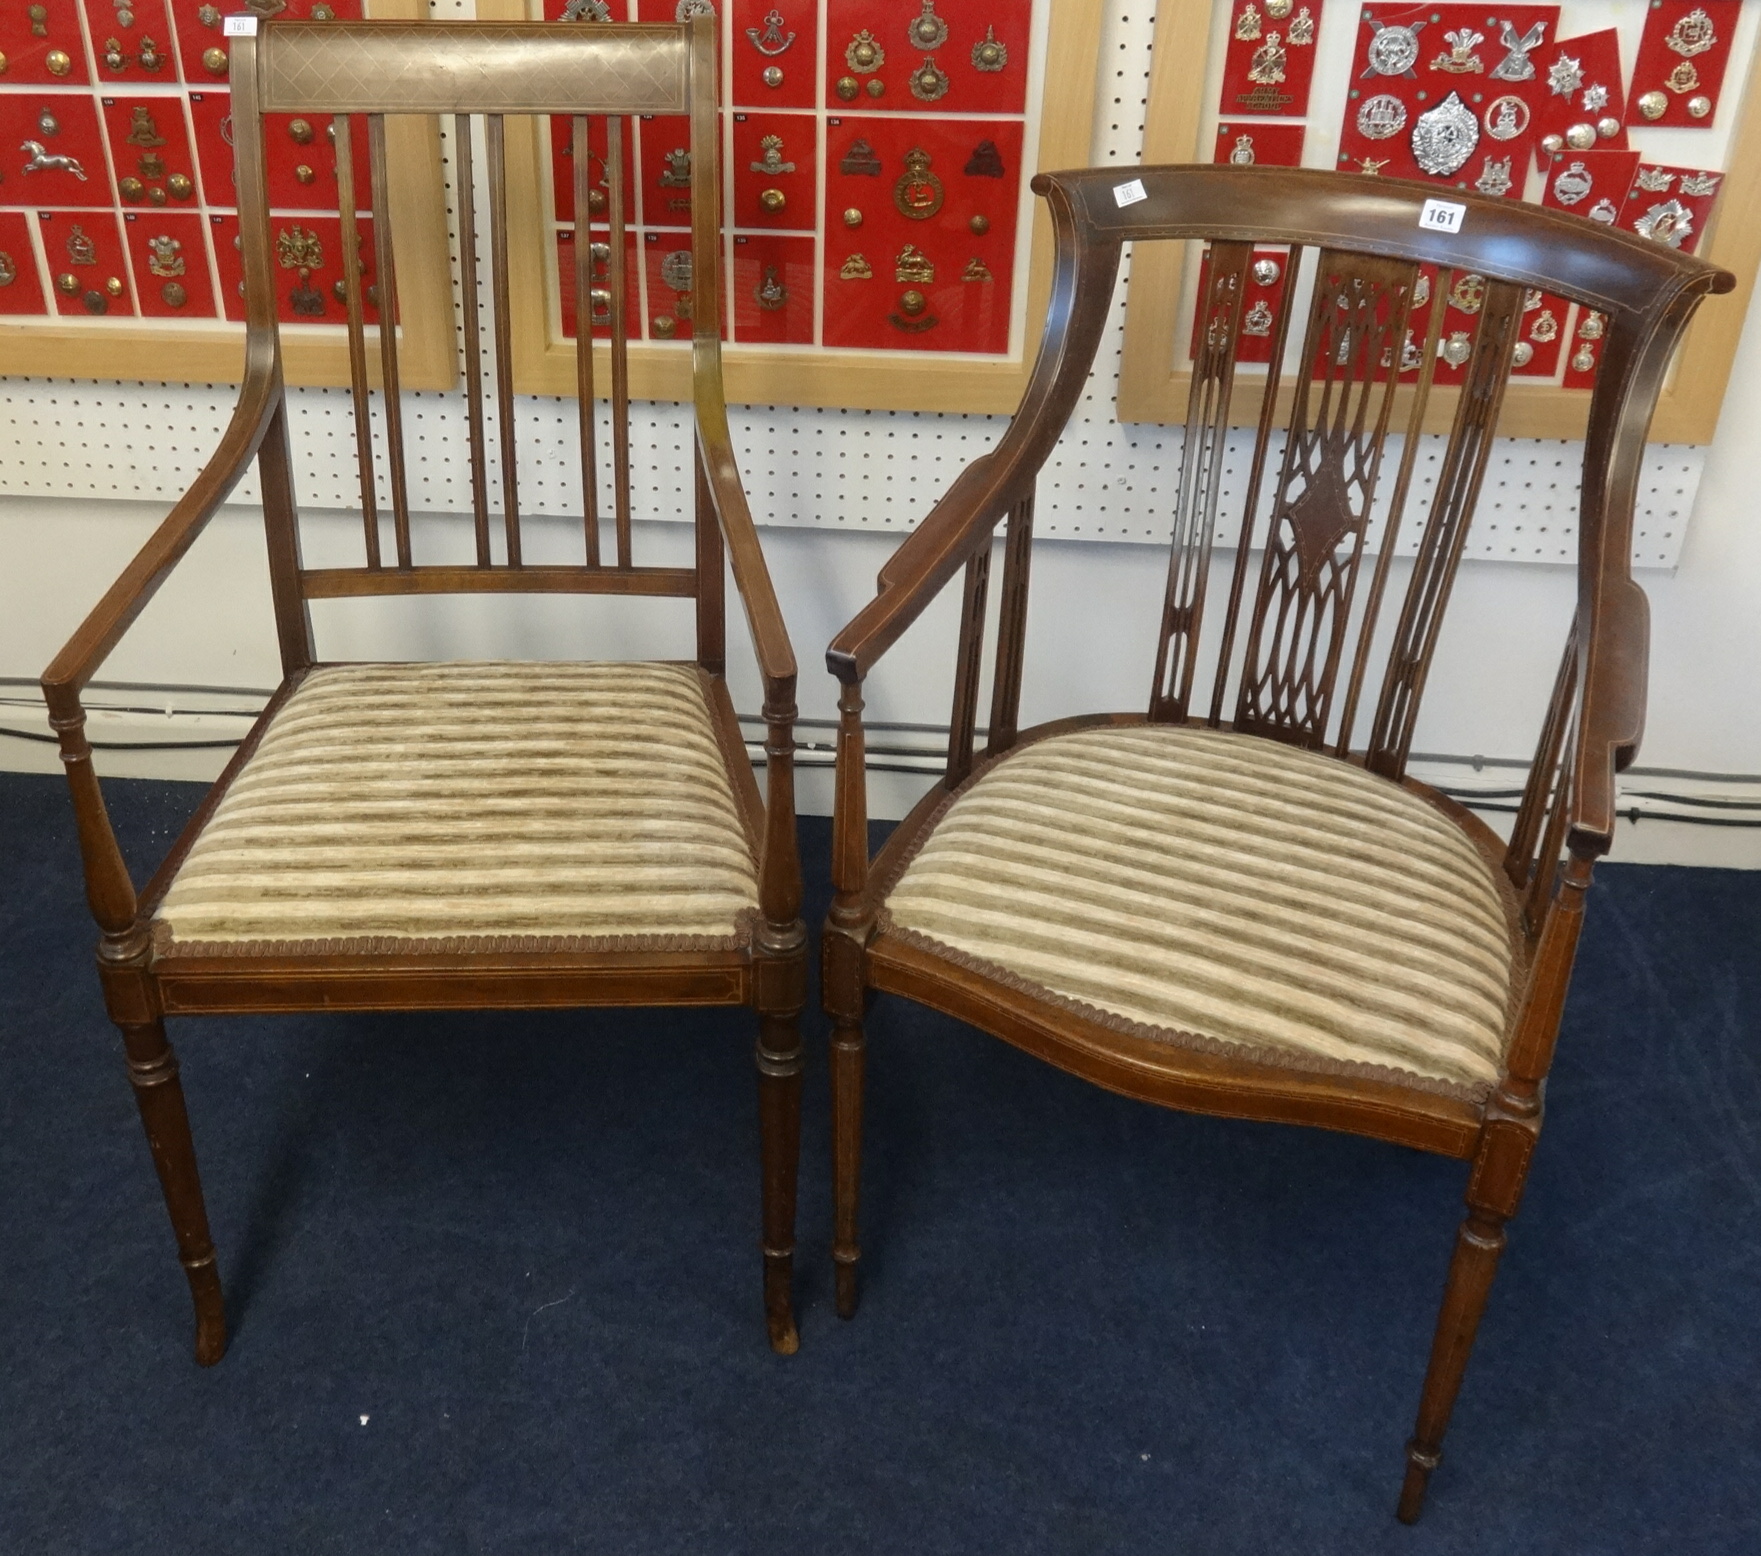 Two Edwardian inlaid mahogany elbow chairs